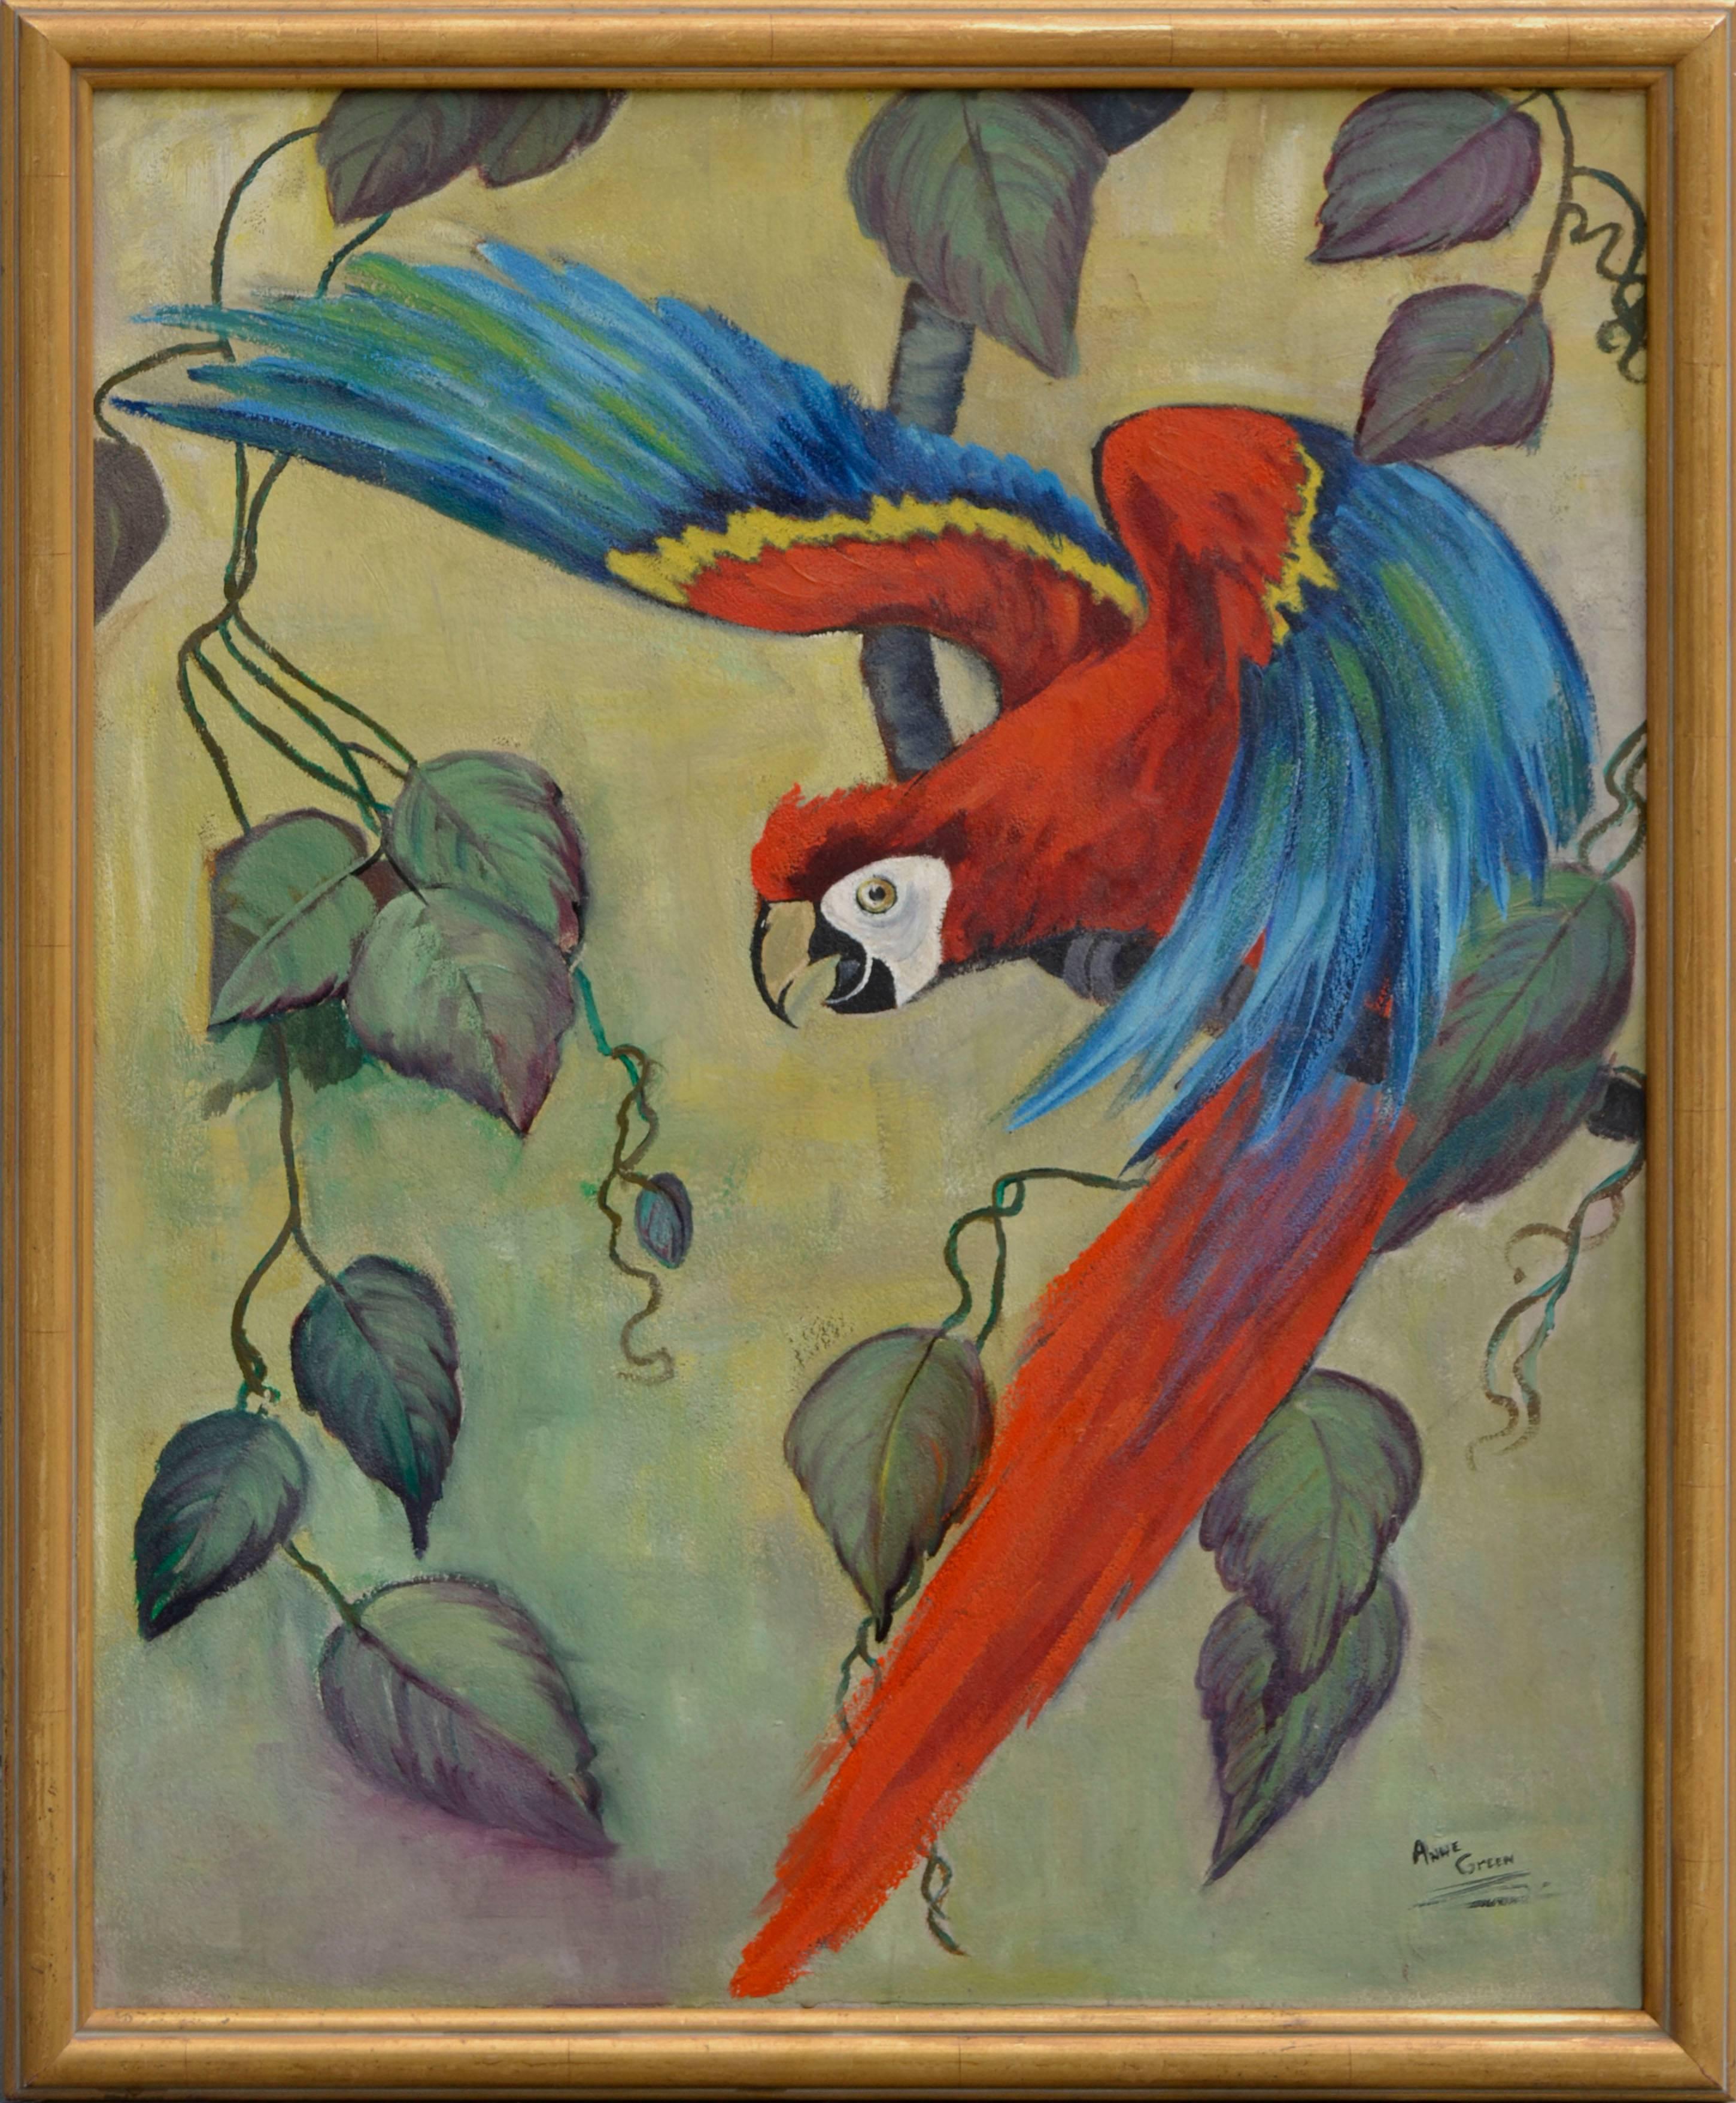 Painterly image of Scarlet Macaw about to take flight by Anne Green (American, 20th century). Signed by the artist lower right. Possibly mid 1950's vintage. Presented in rustic gold frame, retouched. Image, 30"H x 24"W. 
